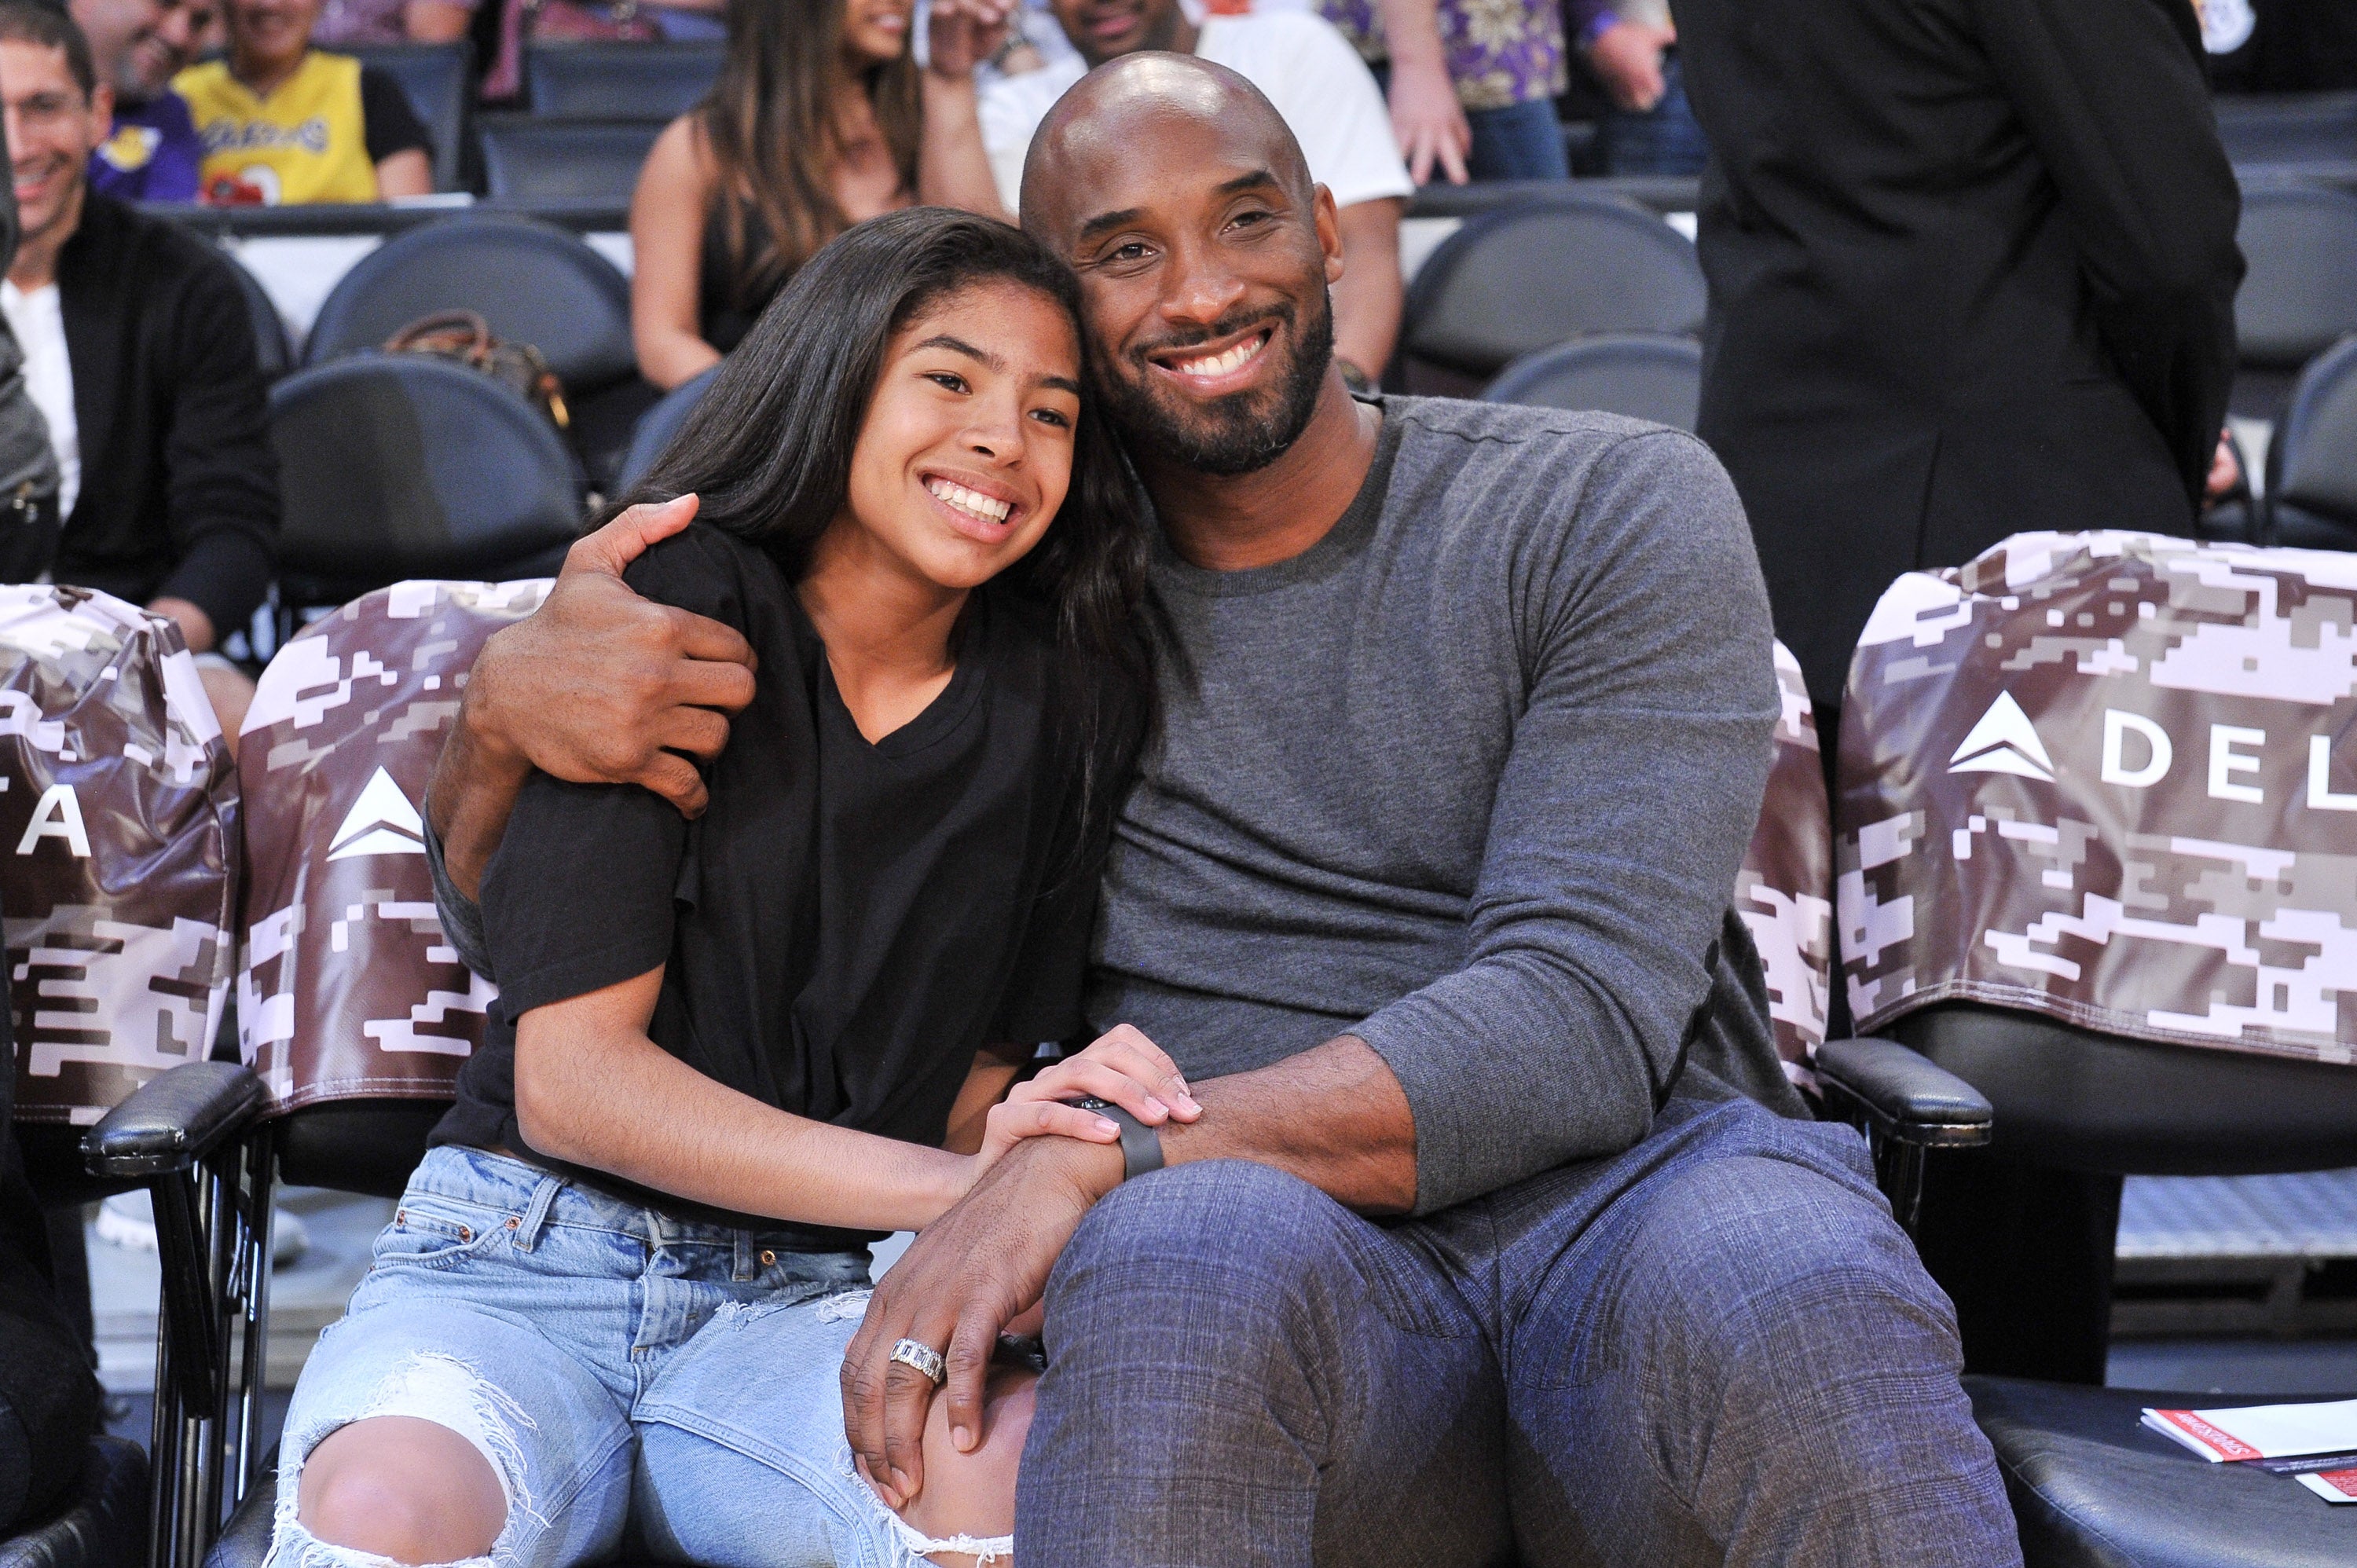 Kobe, daughter celebrated on 2/24 in honor of jersey numbers